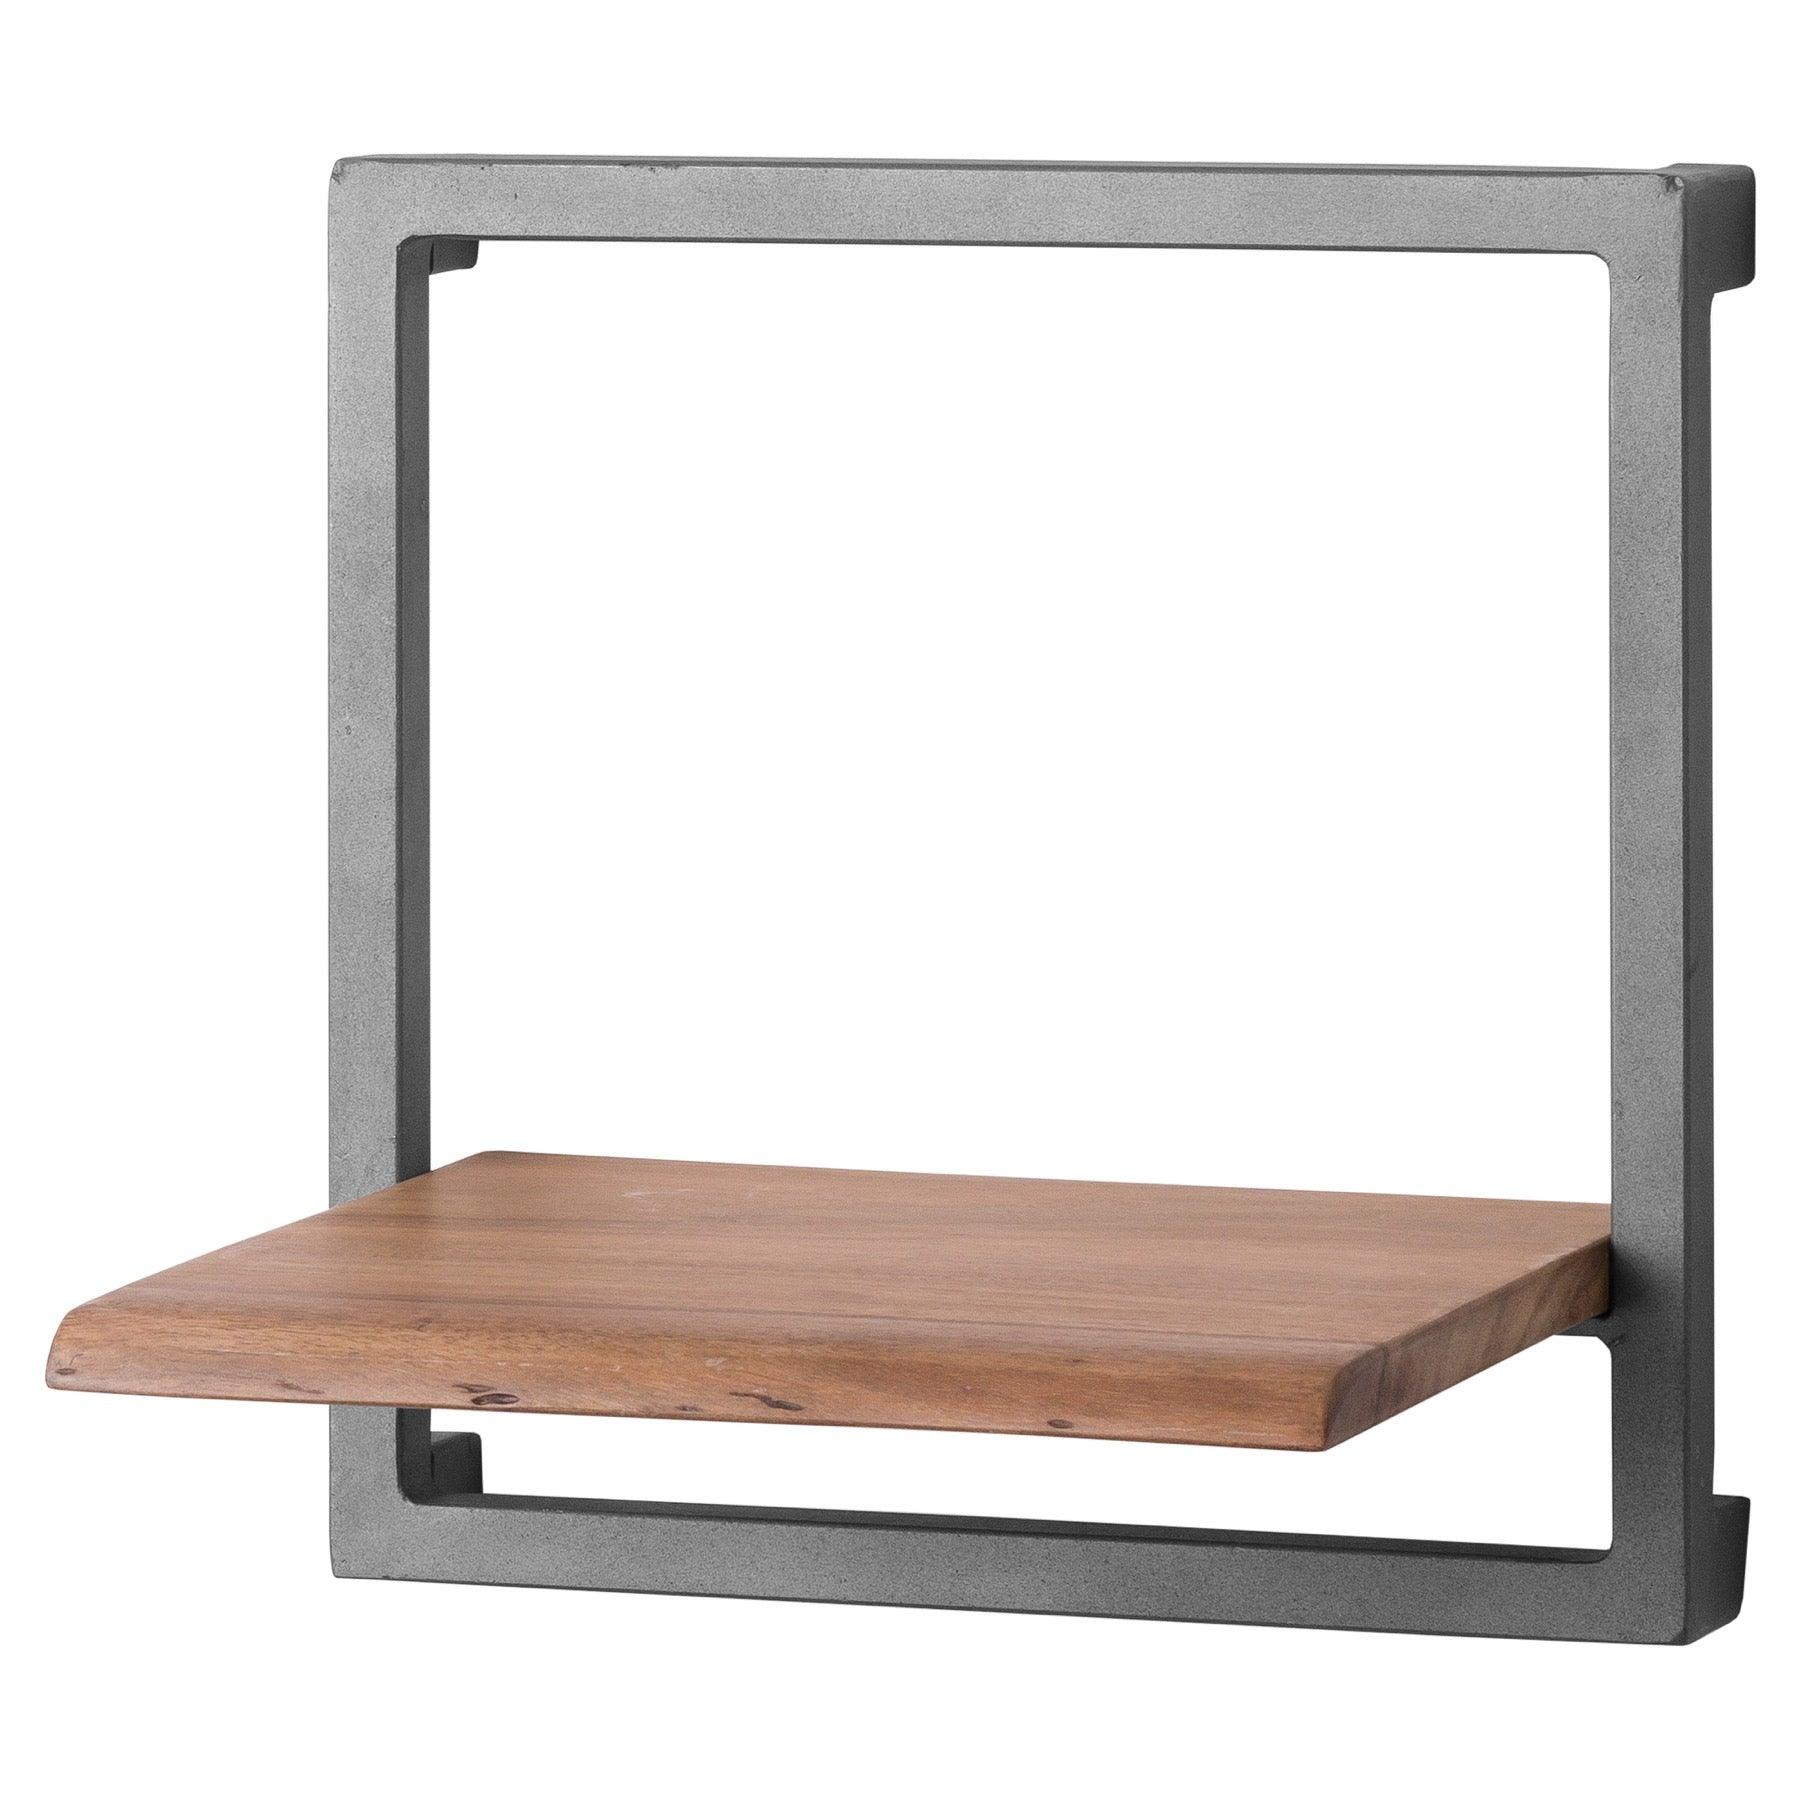 View Live Edge Collection Square Shelf information